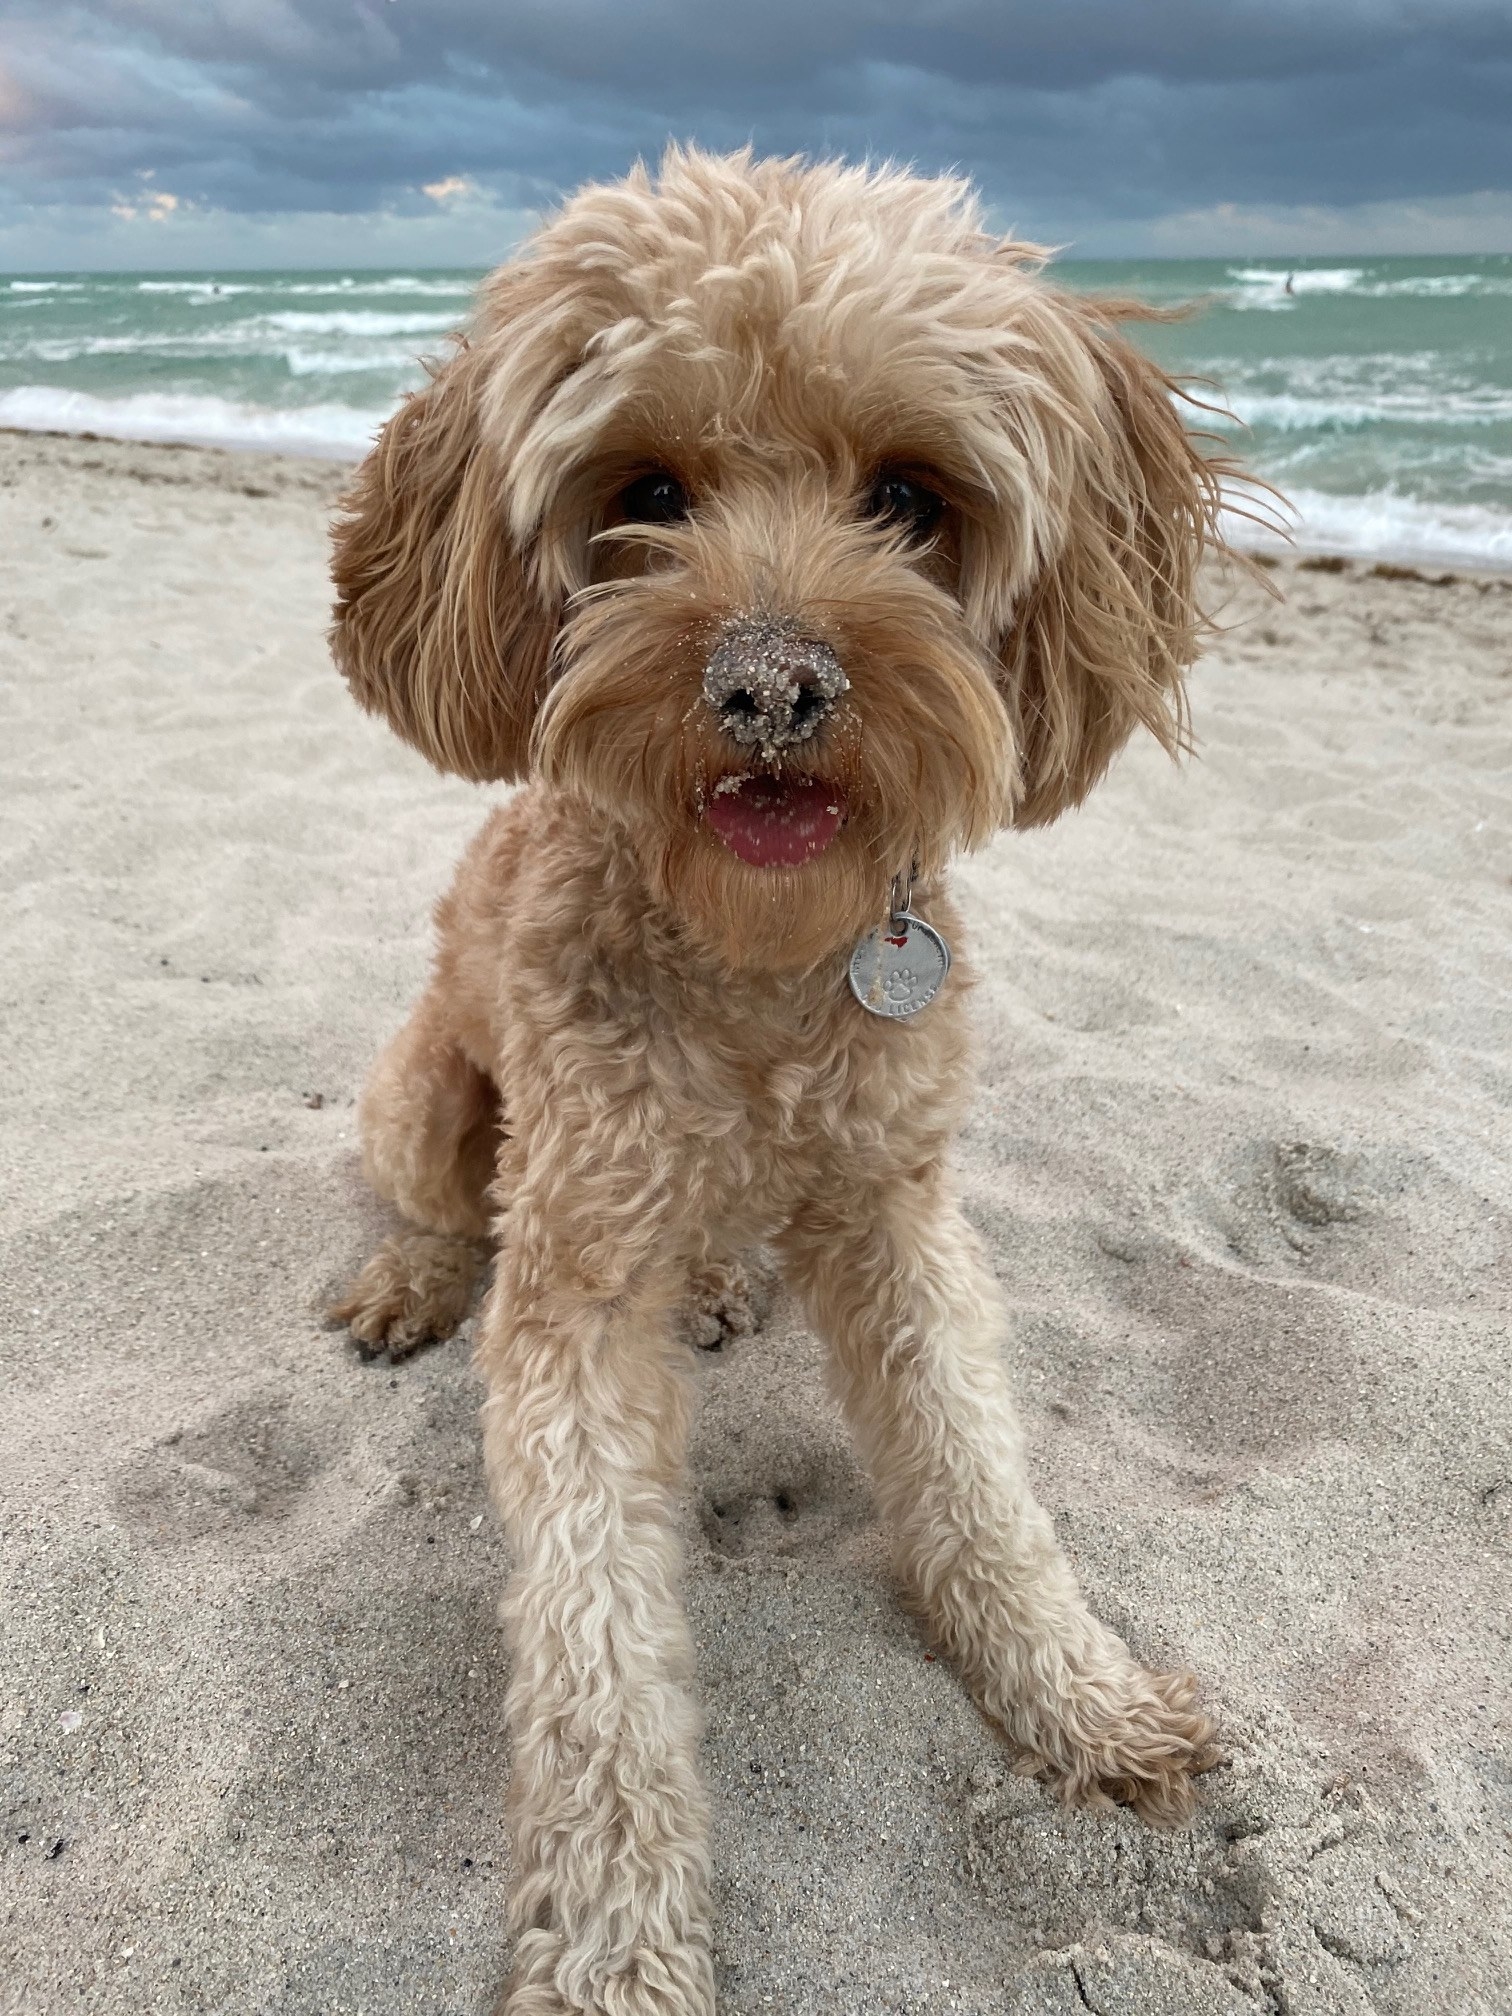 A dog with a sandy nose.